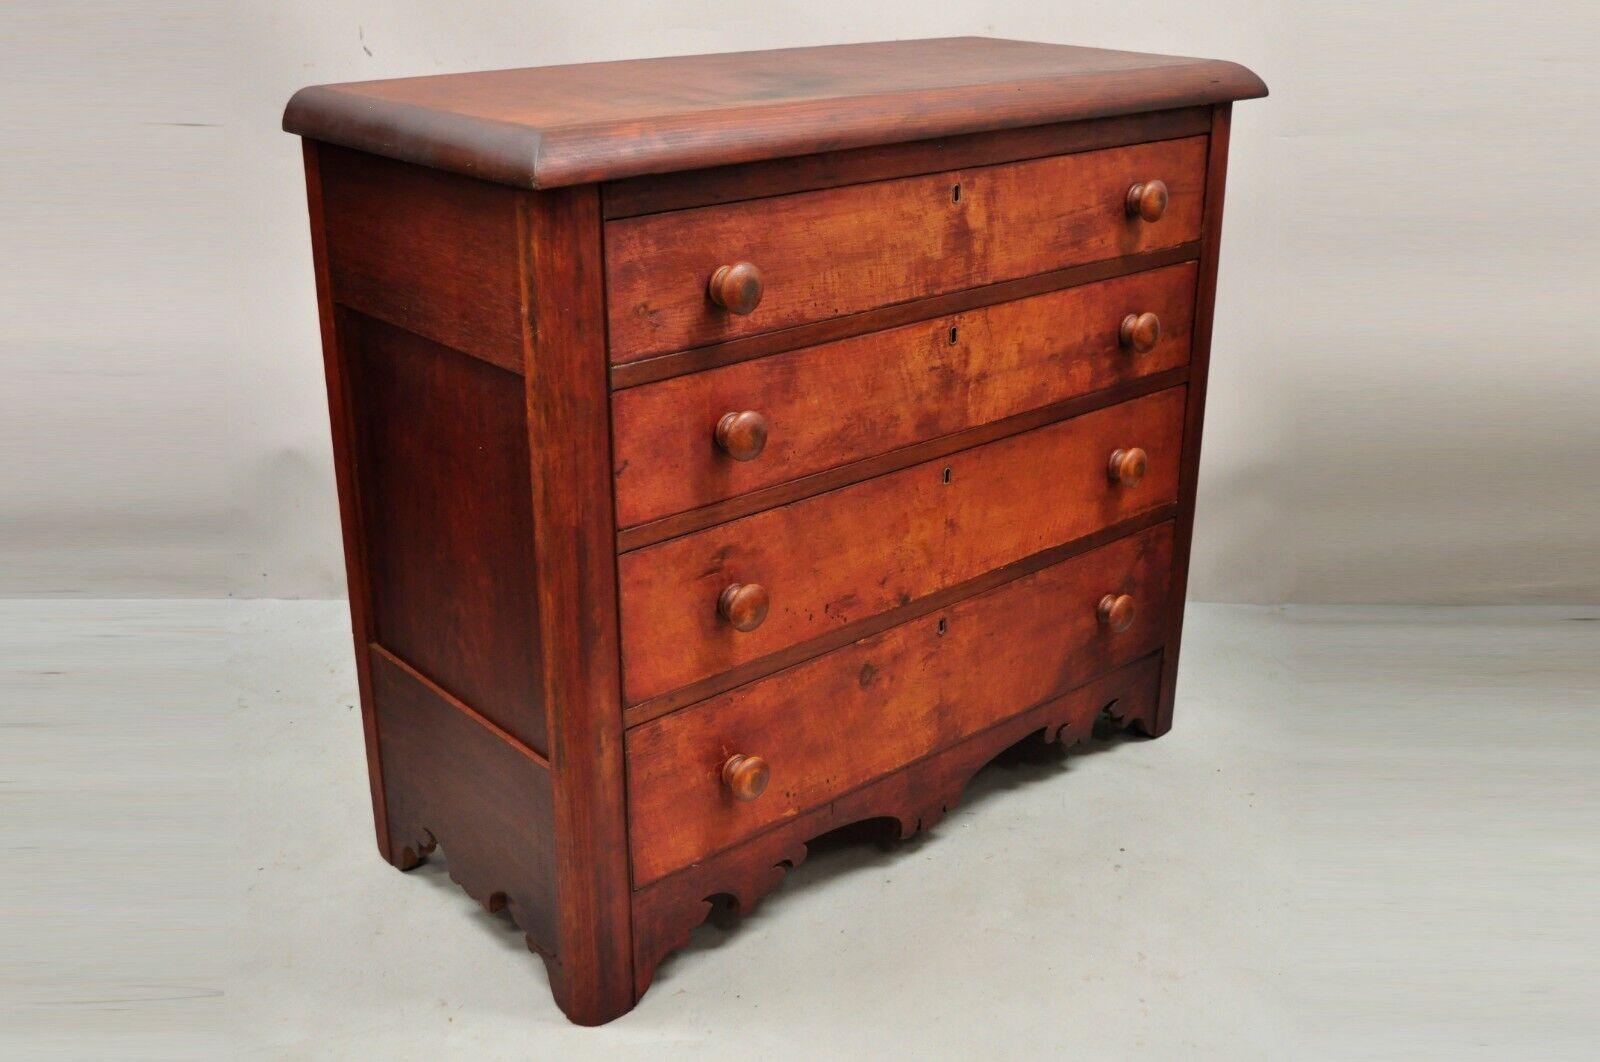 Antique carved Victorian pine wood 4 drawer dresser chest red finish. Item features a carved lower skirt, reddish washed finish, distressed finish, 4
dovetailed drawers, no key, but unlocked, very nice antique item. Circa 19th Century.